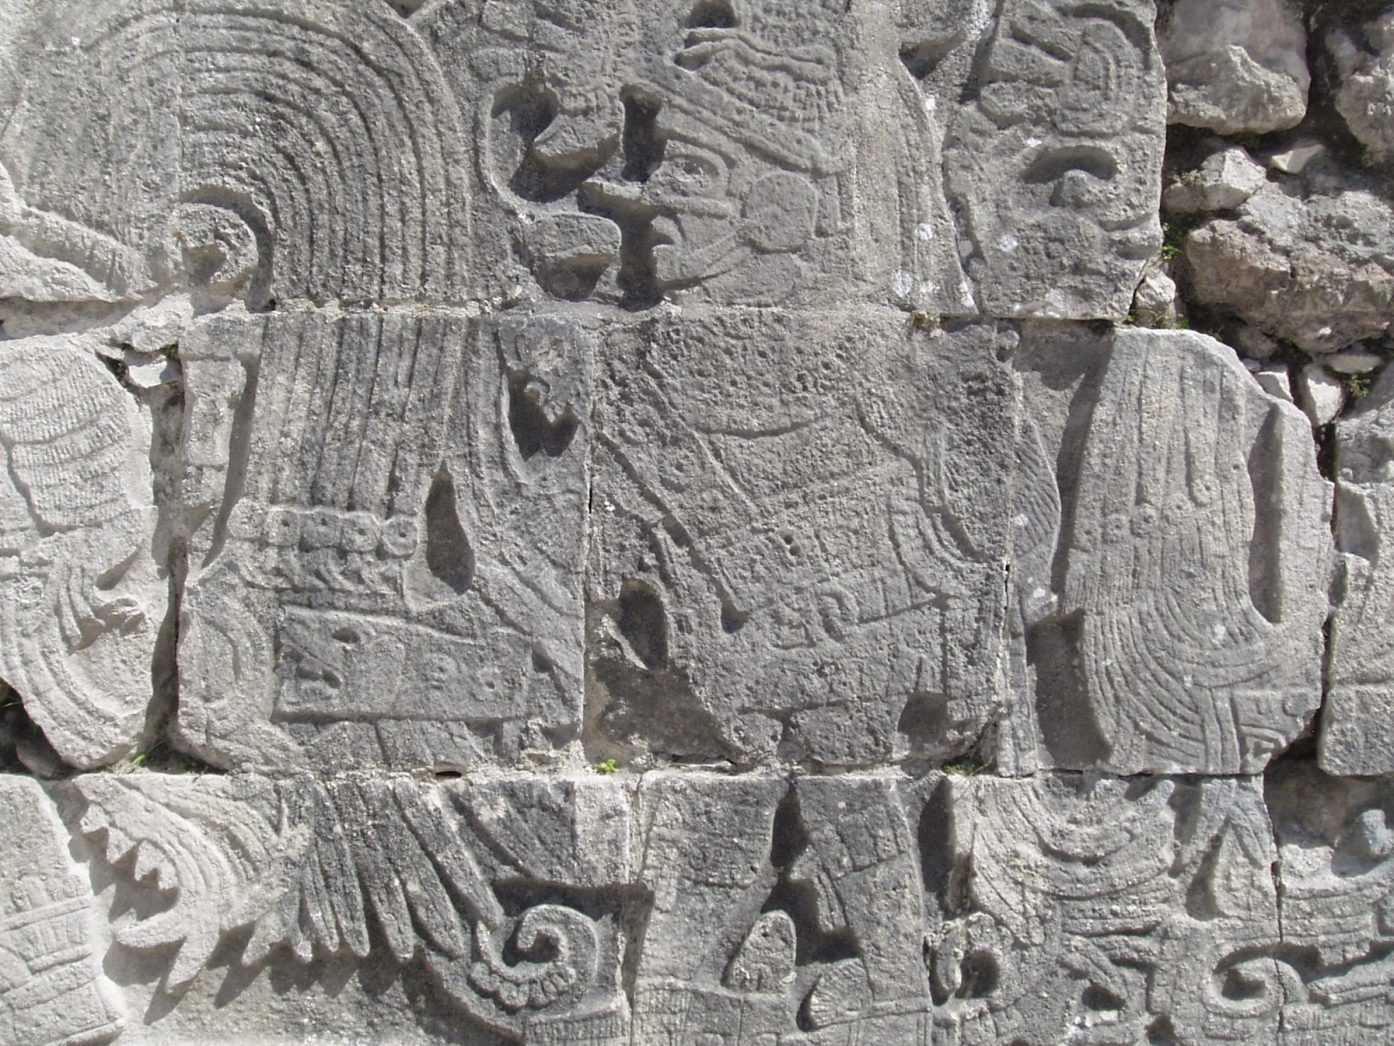 Mayan stone carving in Cancun, Mexico